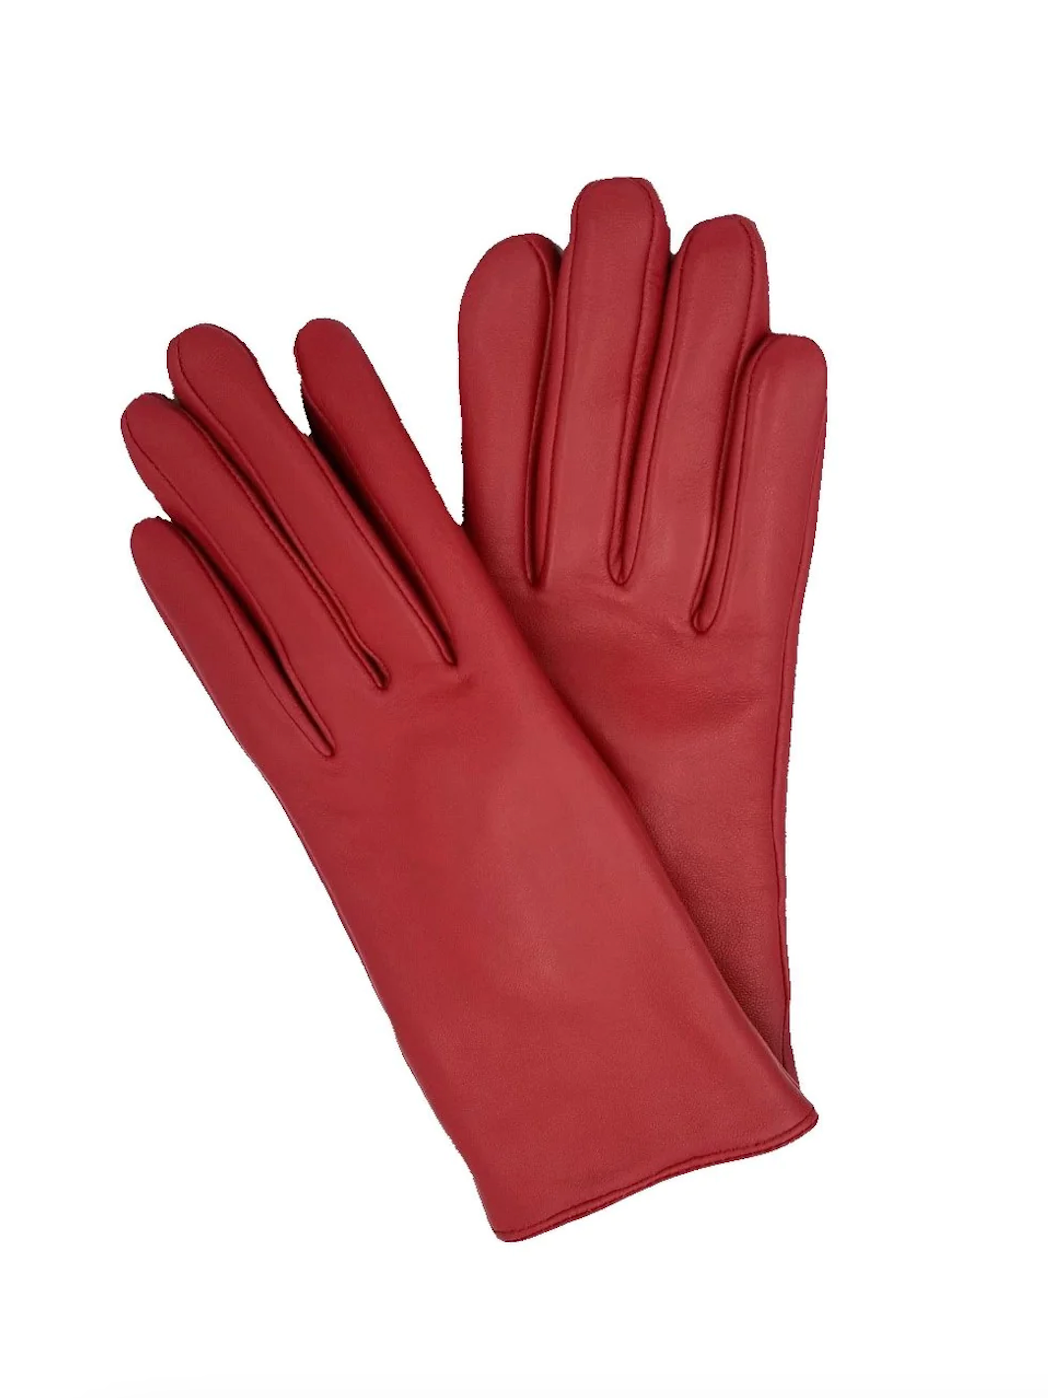 Albee Thinsulate Leather Gloves Red K103C